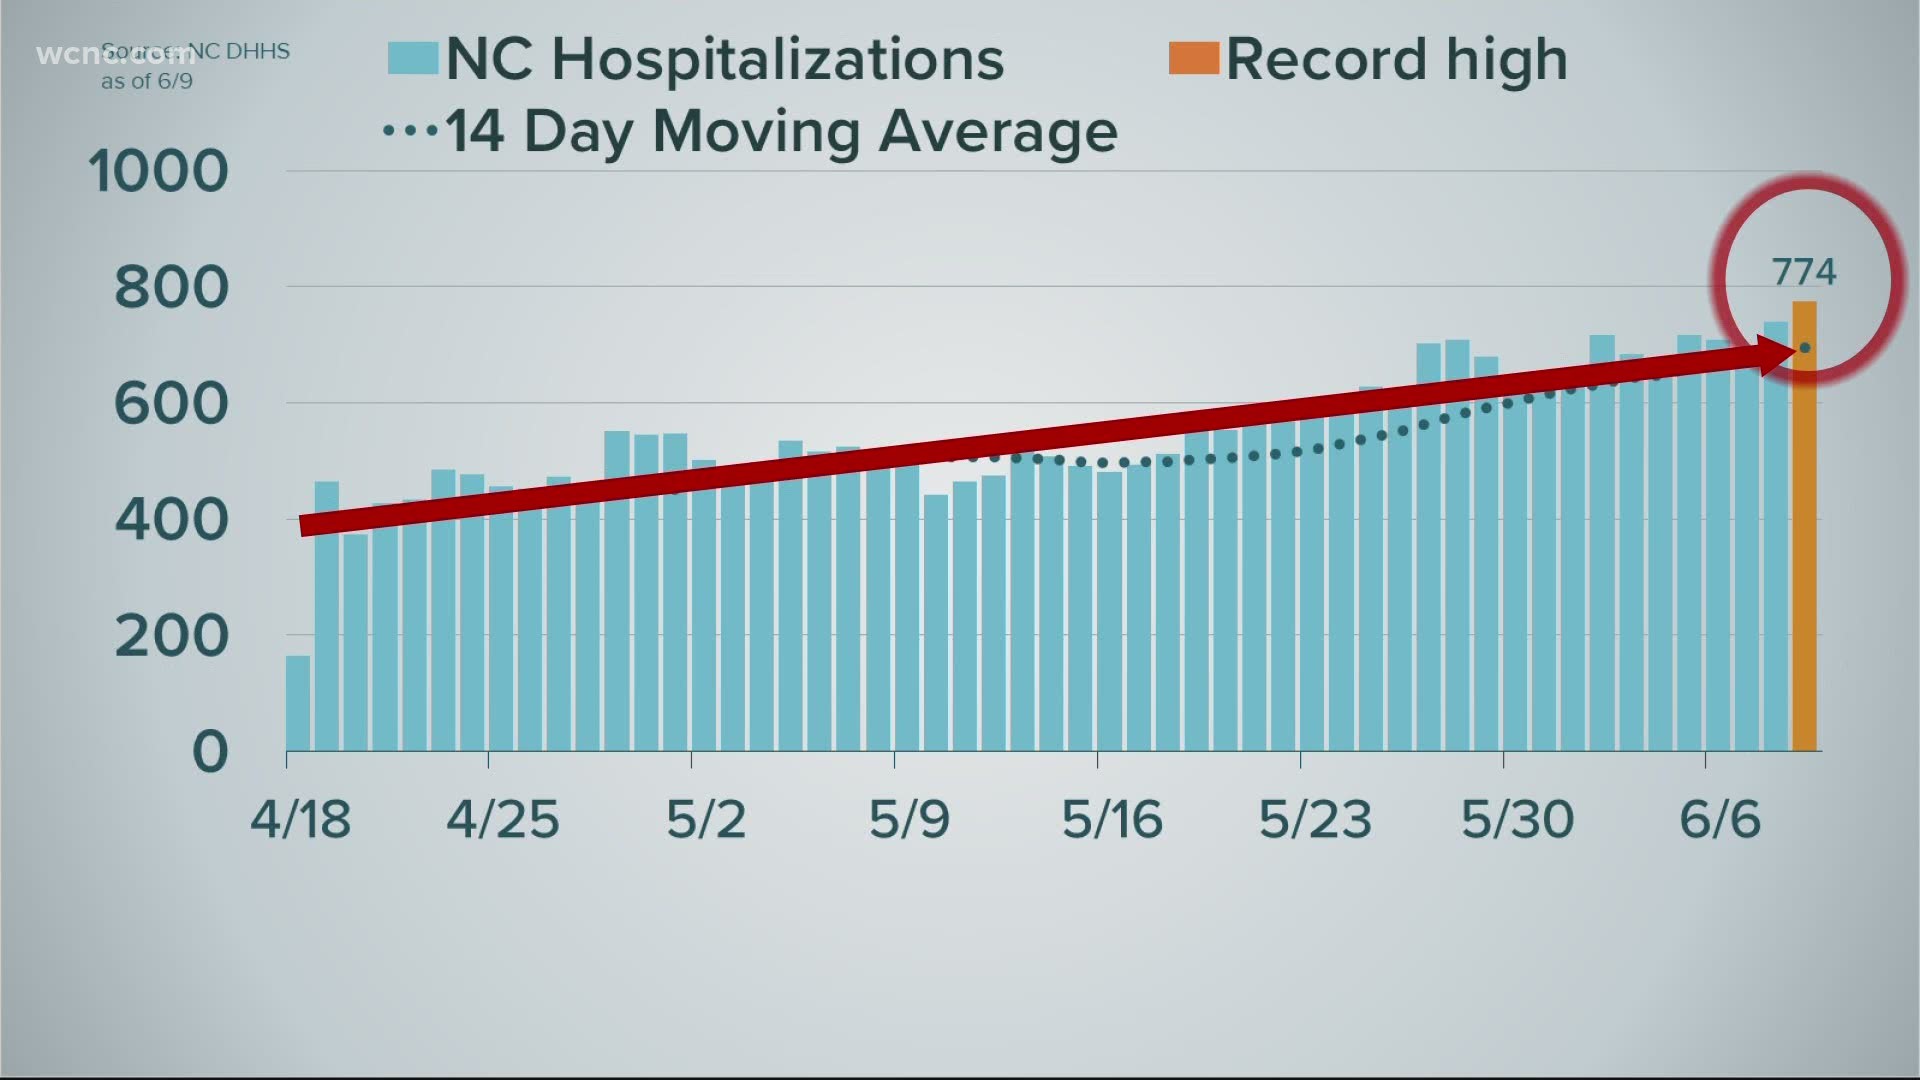 NC continues its trek upward with hospitalizations, yet again hitting a record high. SC had a big spike in percent positive tests but there's a possible explanation.